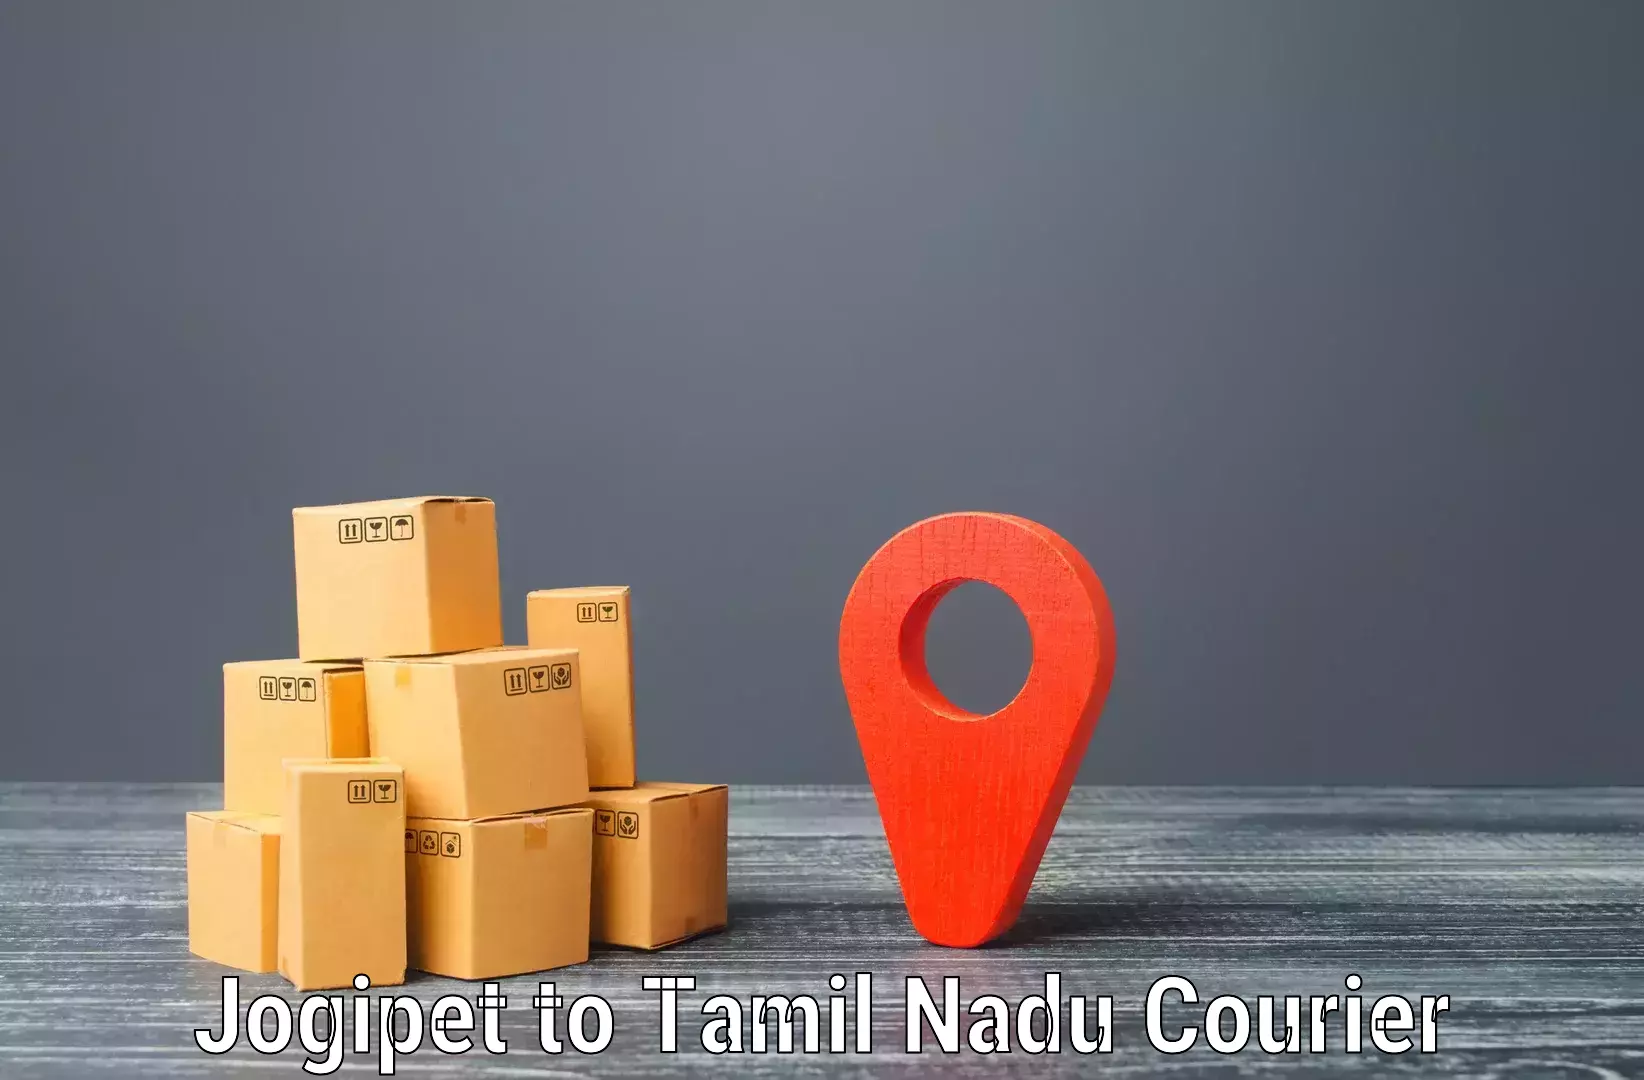 Optimized shipping routes in Jogipet to Melur